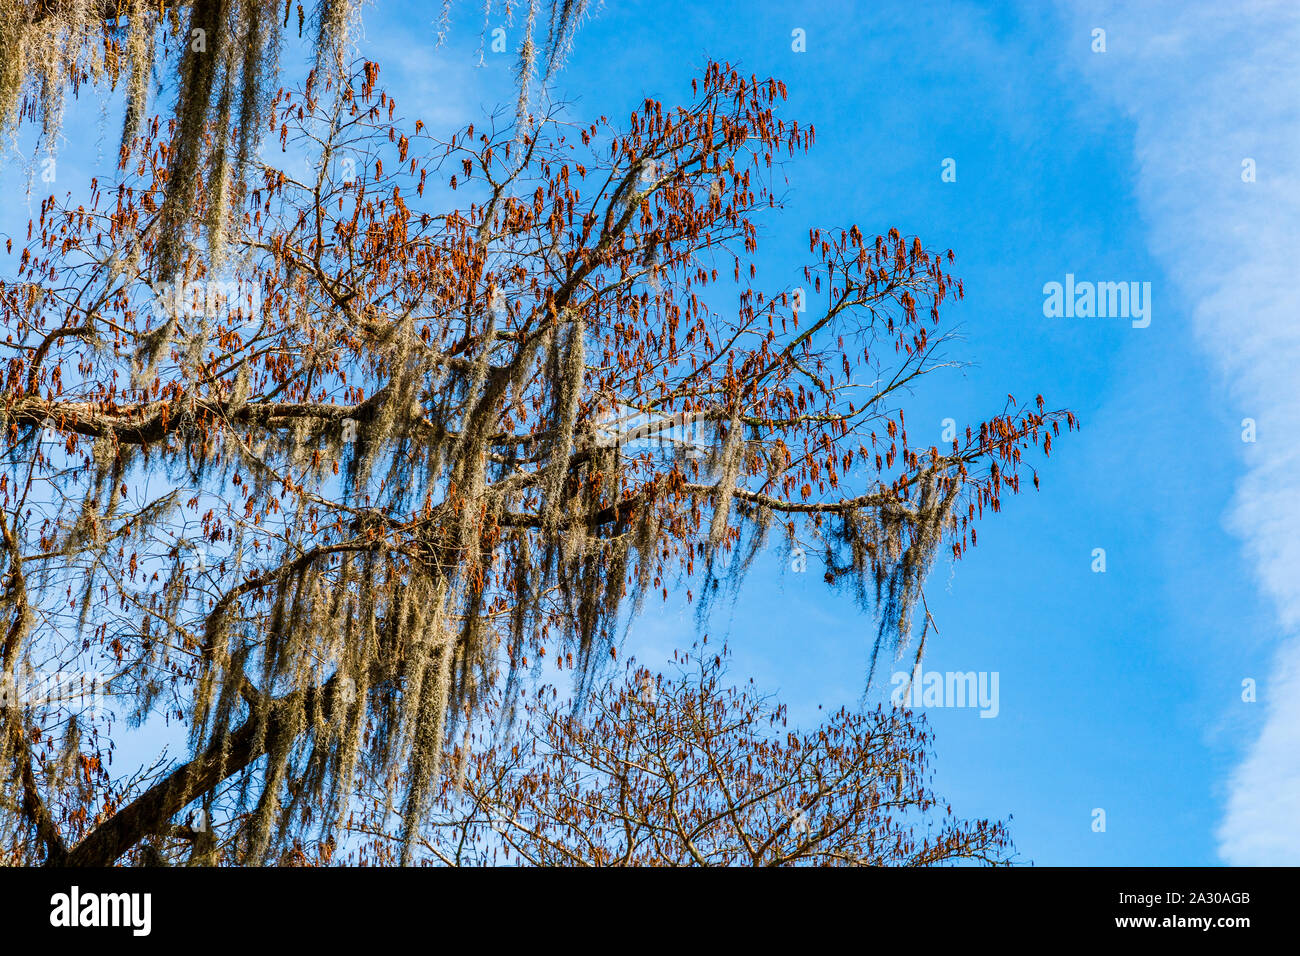 Close-up details of cypress trees branches from the swamps near New Orleans, Louisiana during the autumn season. Stock Photo